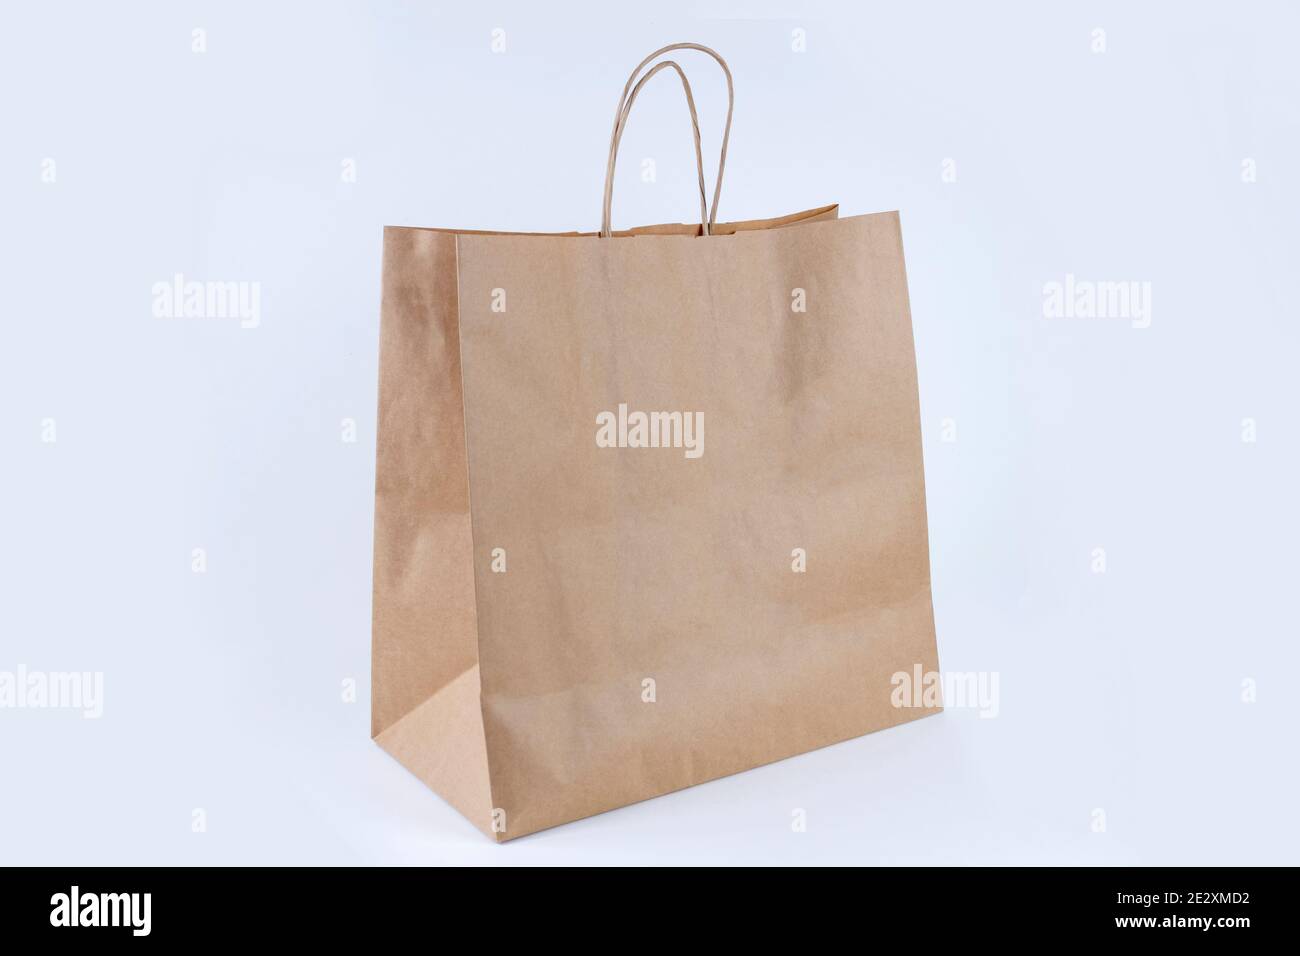 Recycled paper shopping bag on white background Stock Photo